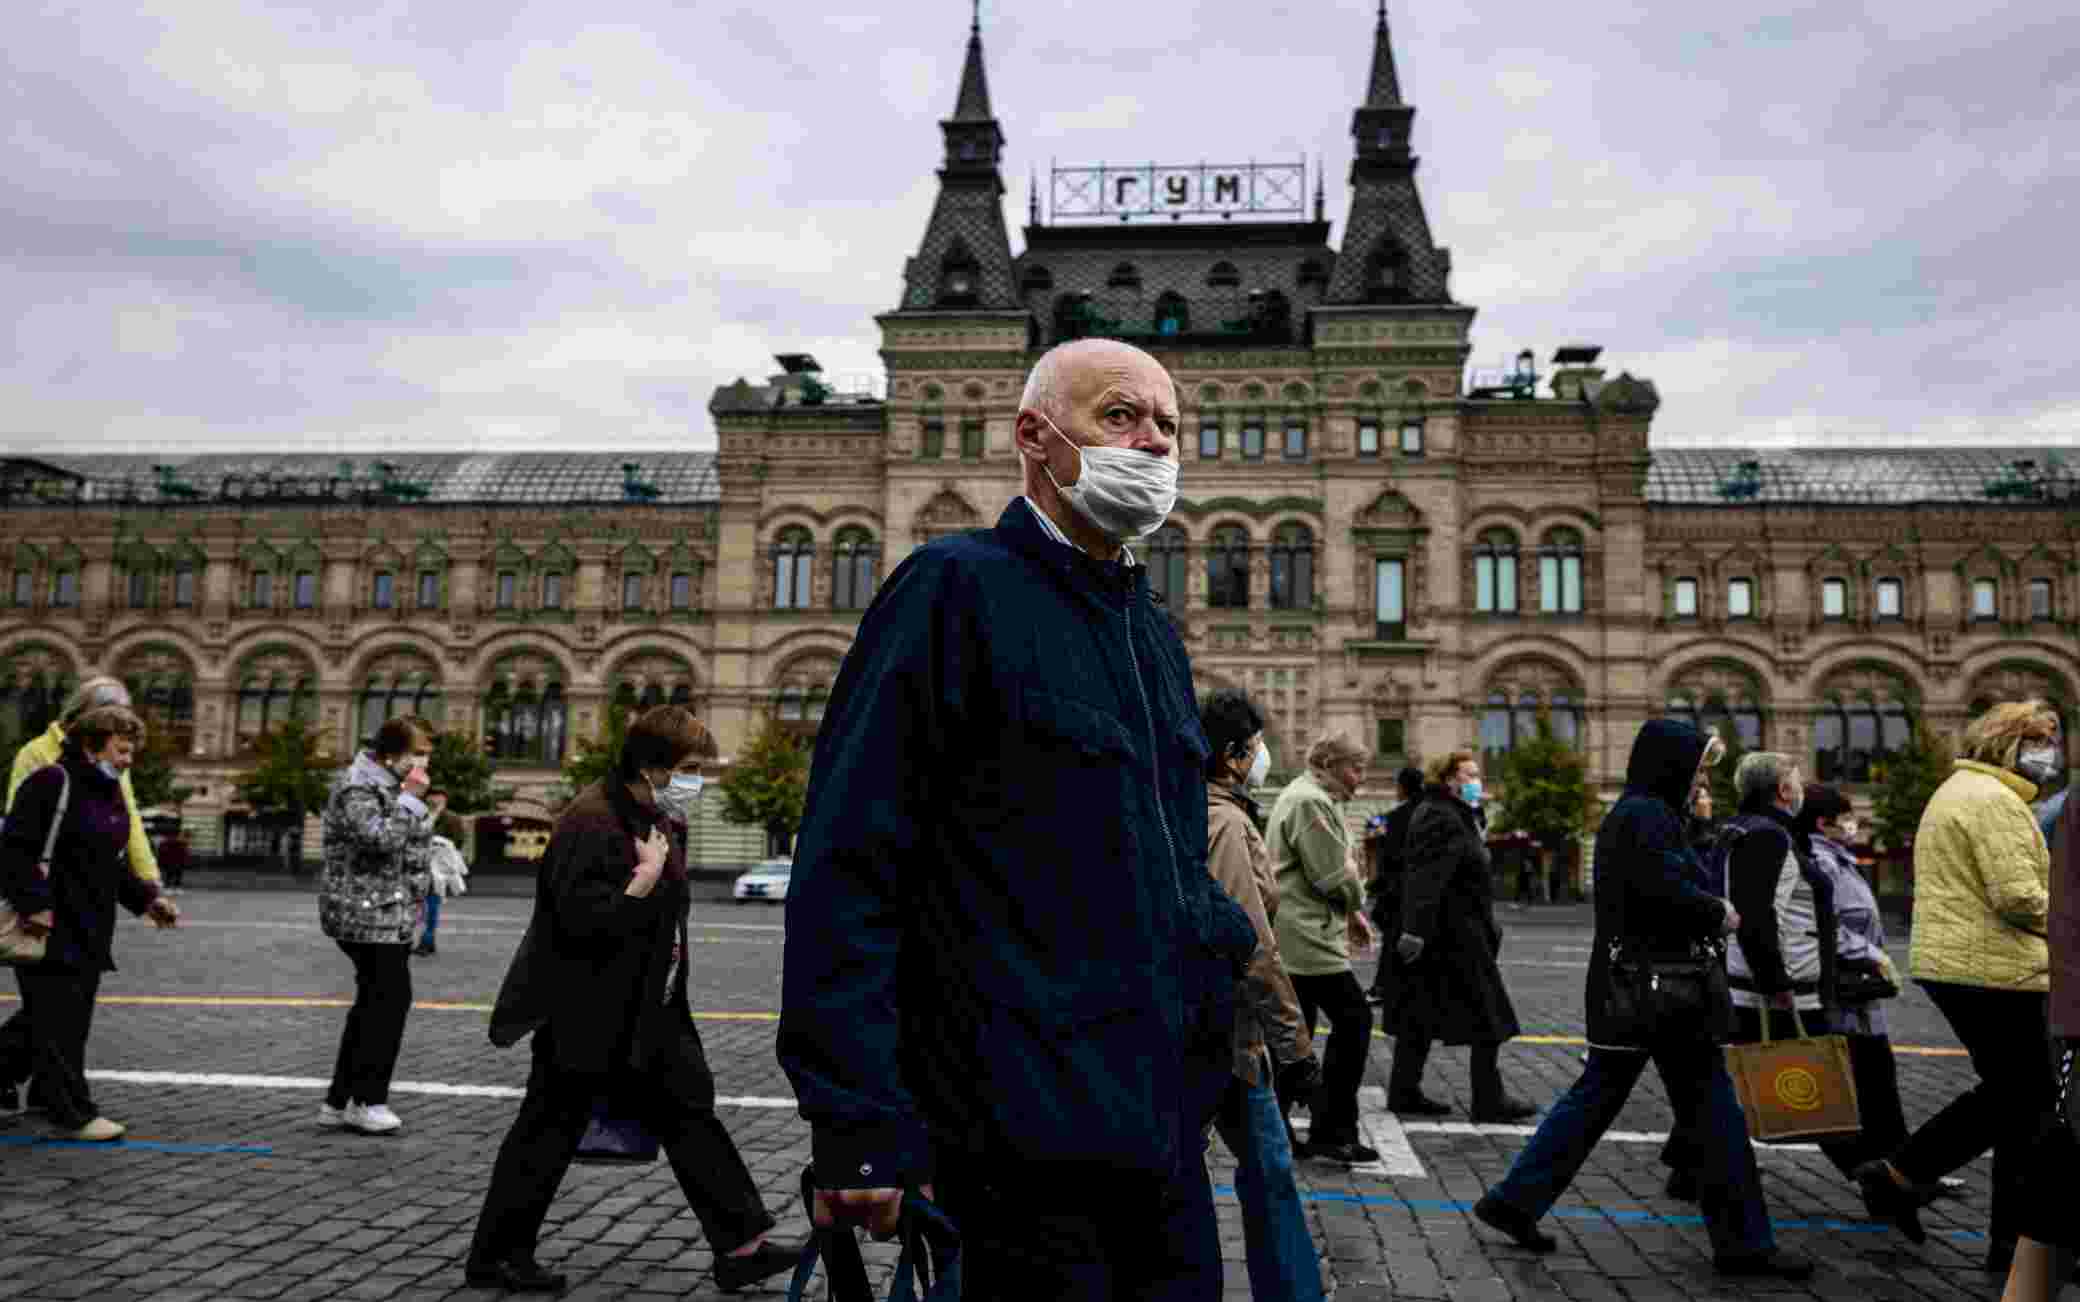 A man wearing a face mask to protect against the coronavirus disease walks on Red Square in front of the GUM department store in central Moscow on October 7, 2020. (Photo by Dimitar DILKOFF / AFP) (Photo by DIMITAR DILKOFF/AFP via Getty Images)